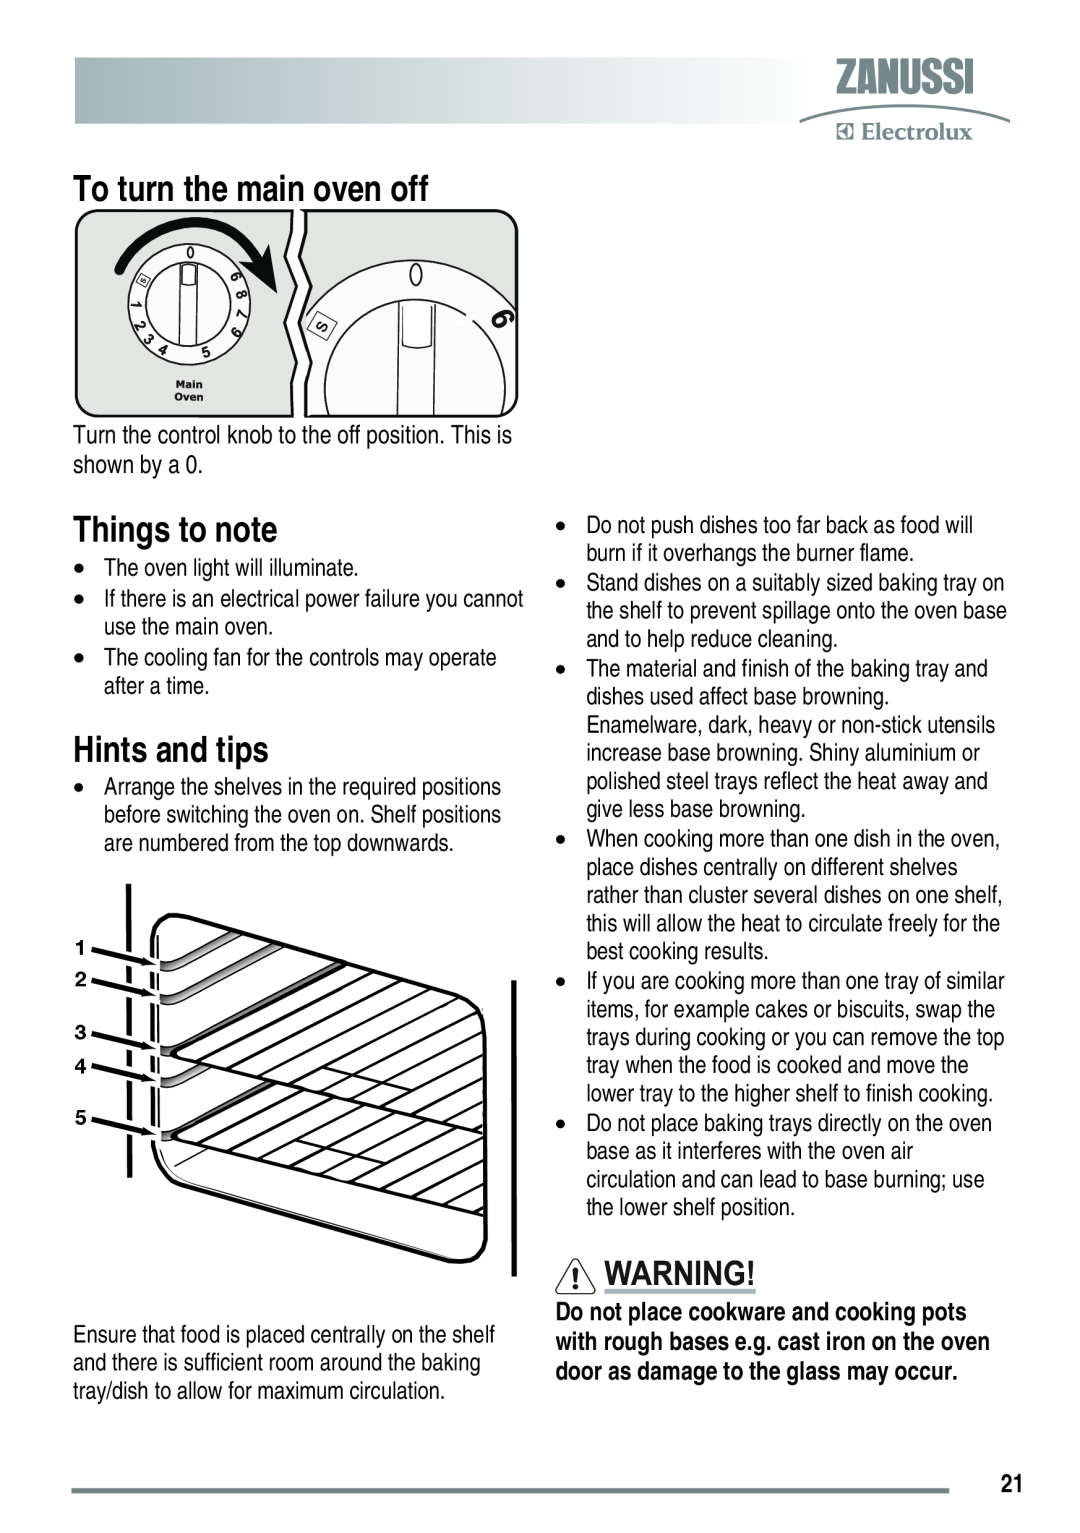 Zanussi FH10 user manual To turn the main oven off, The oven light will illuminate, Things to note, Hints and tips 